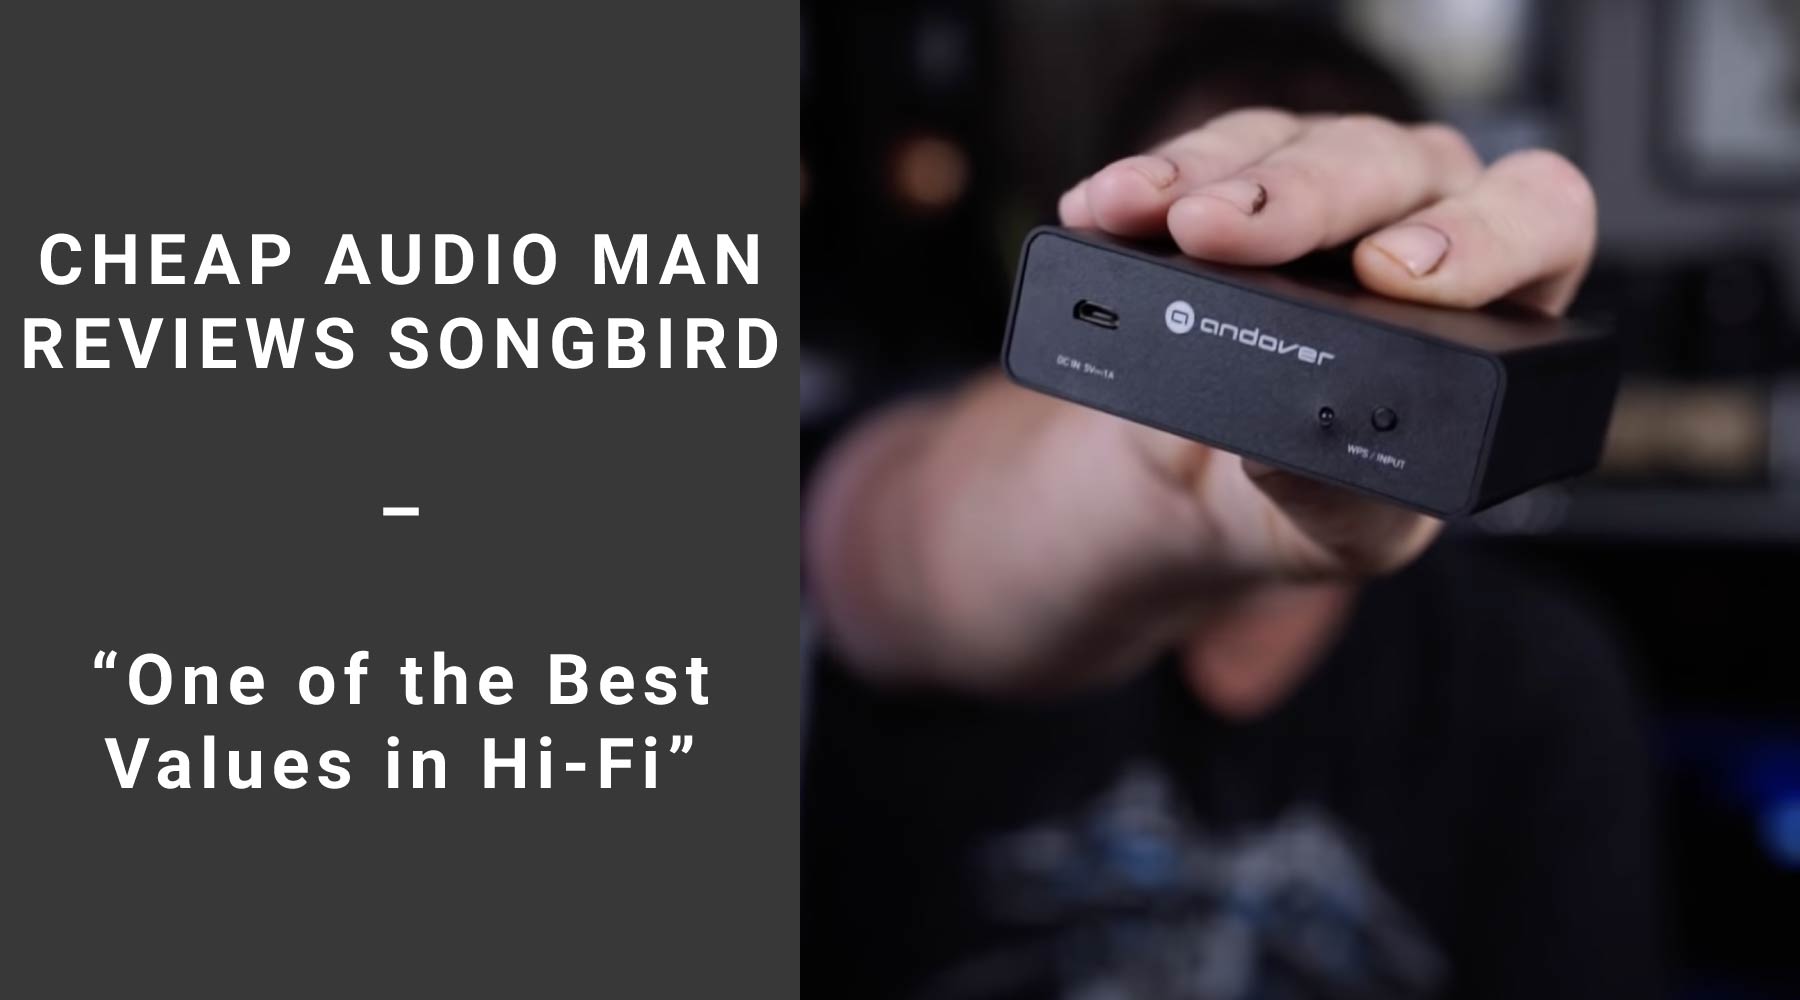 Songbird streamer review by Randy, the Cheap Audio Man